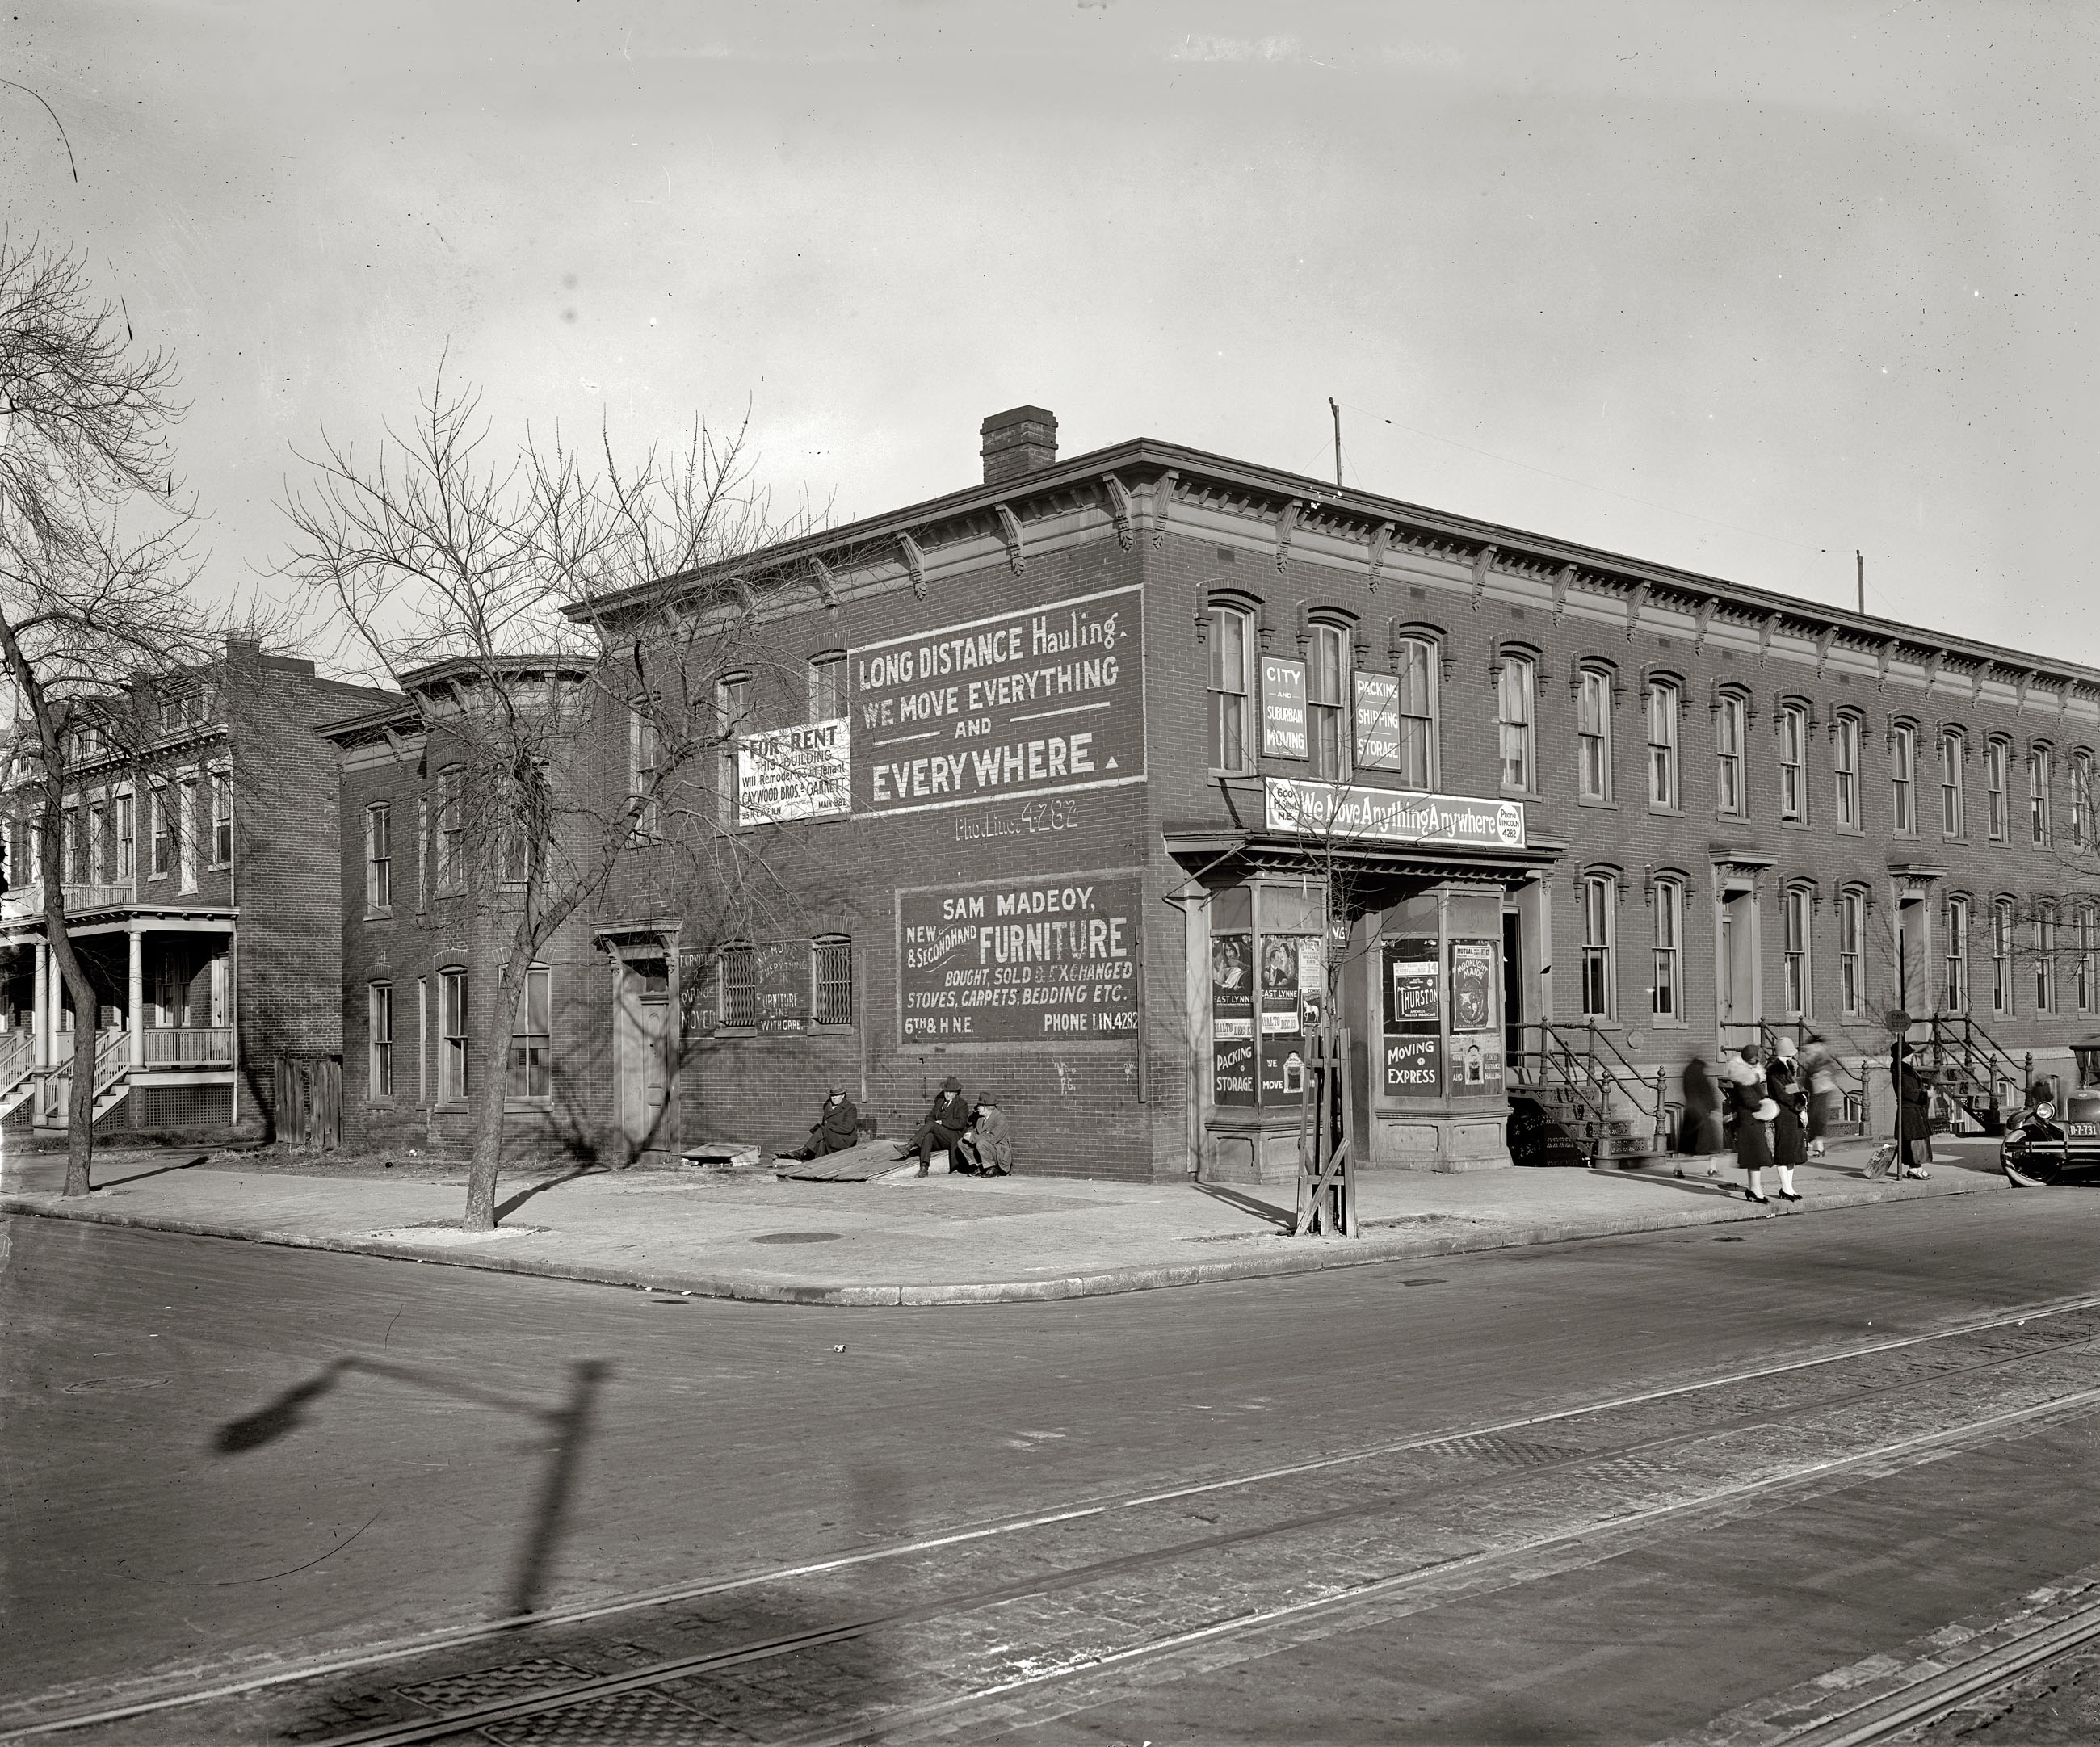 "Rowhouses and moving company." Circa 1925, the furniture and hauling business of Sam Madeoy at 600 H Street N.E. National Photo Company. View full size.